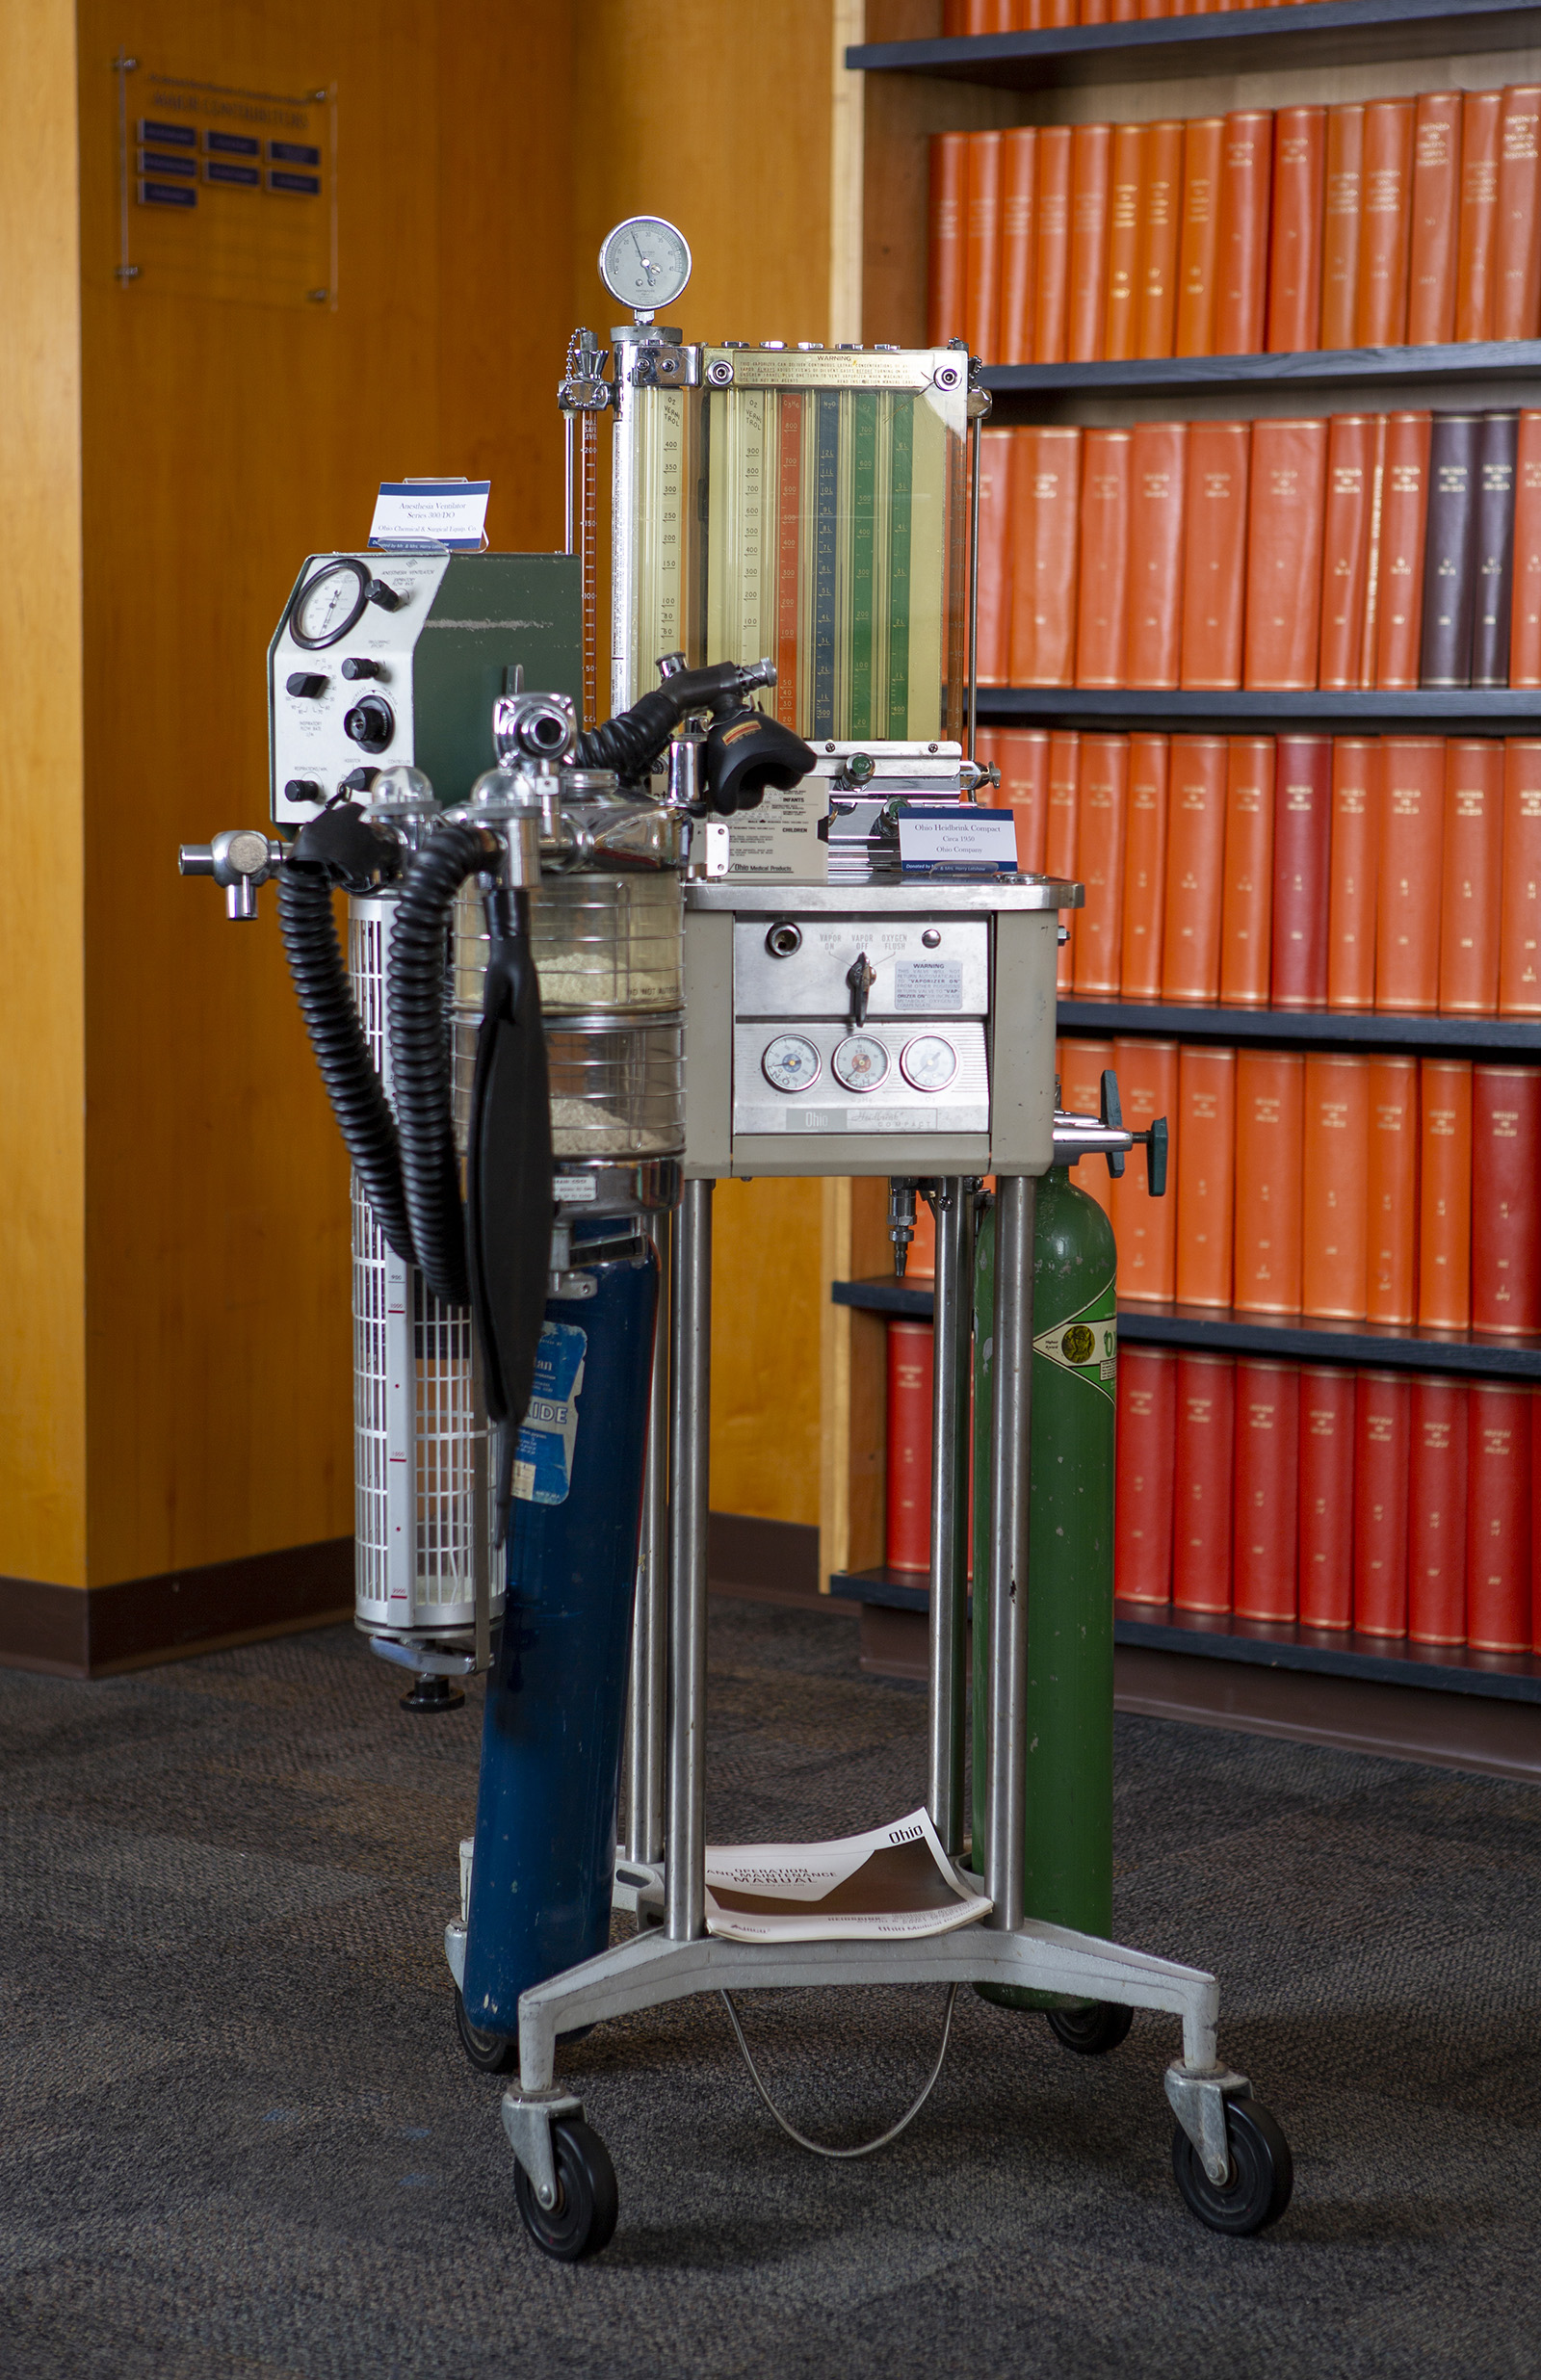 Ohio Kinet-O-Meter machine stands in a museum with a shelf of books behind it at right.